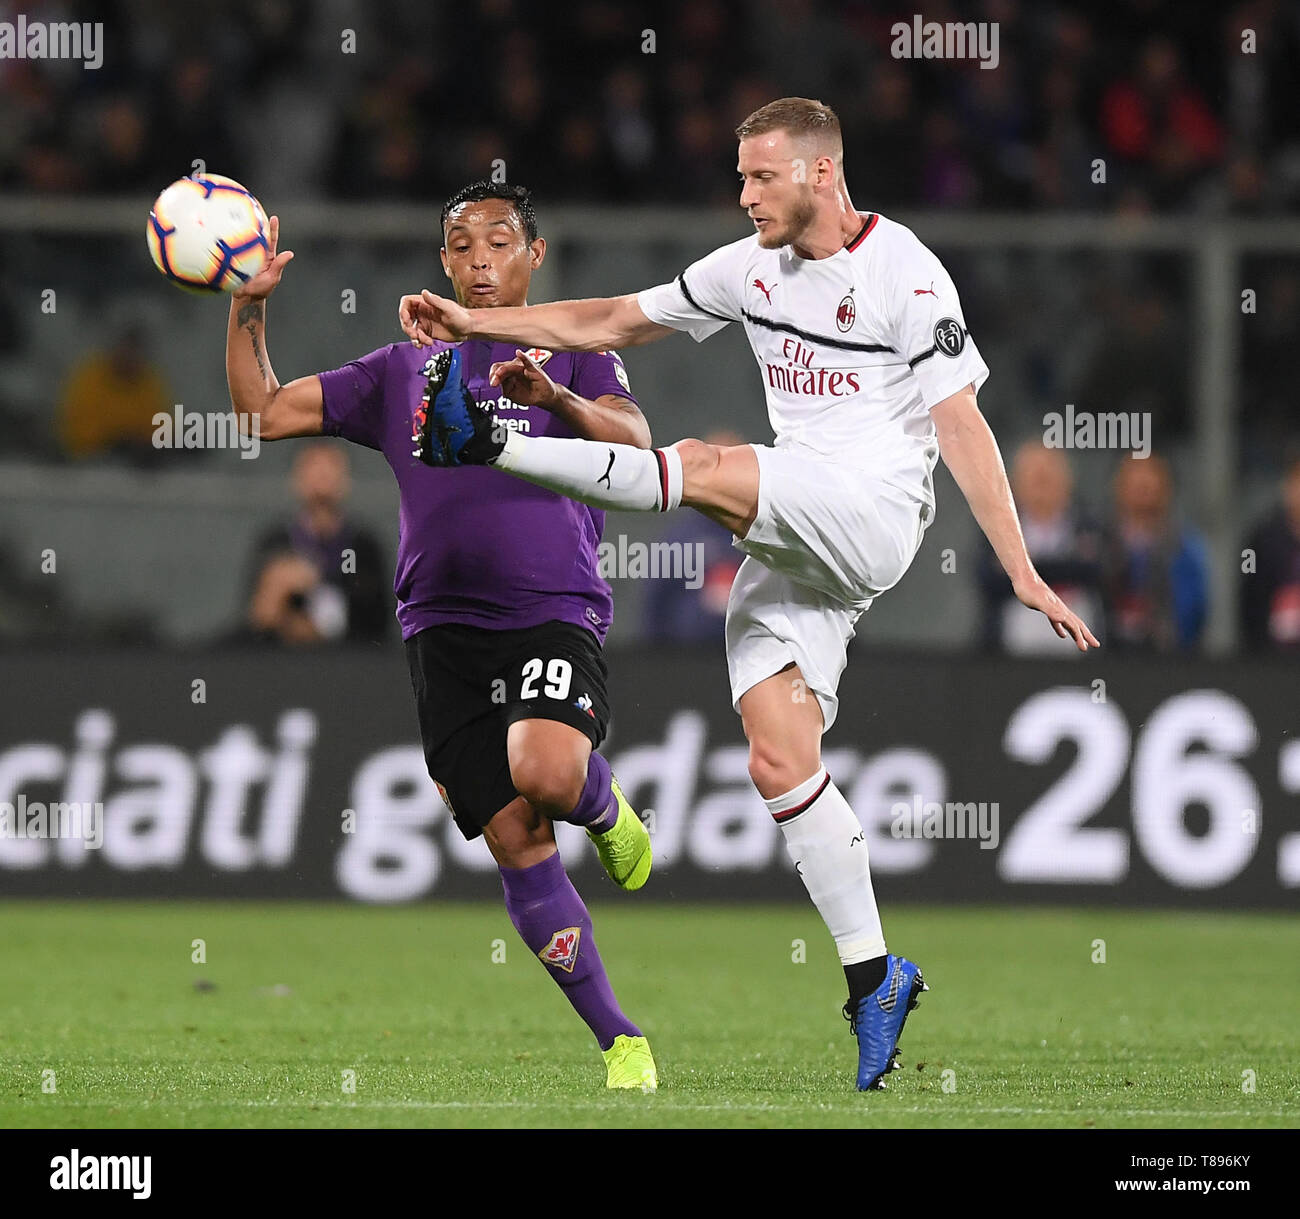 Florence, Italy. 11th May, 2019. AC Milan's Ignazio Abate (R) vies with Fiorentina's Luis Muriel during a Serie A soccer match between Fiorentina and AC Milan in Florence, Italy, May. 11, 2019. Fiorentina lost 0-1. Credit: Alberto Lingria/Xinhua/Alamy Live News Stock Photo